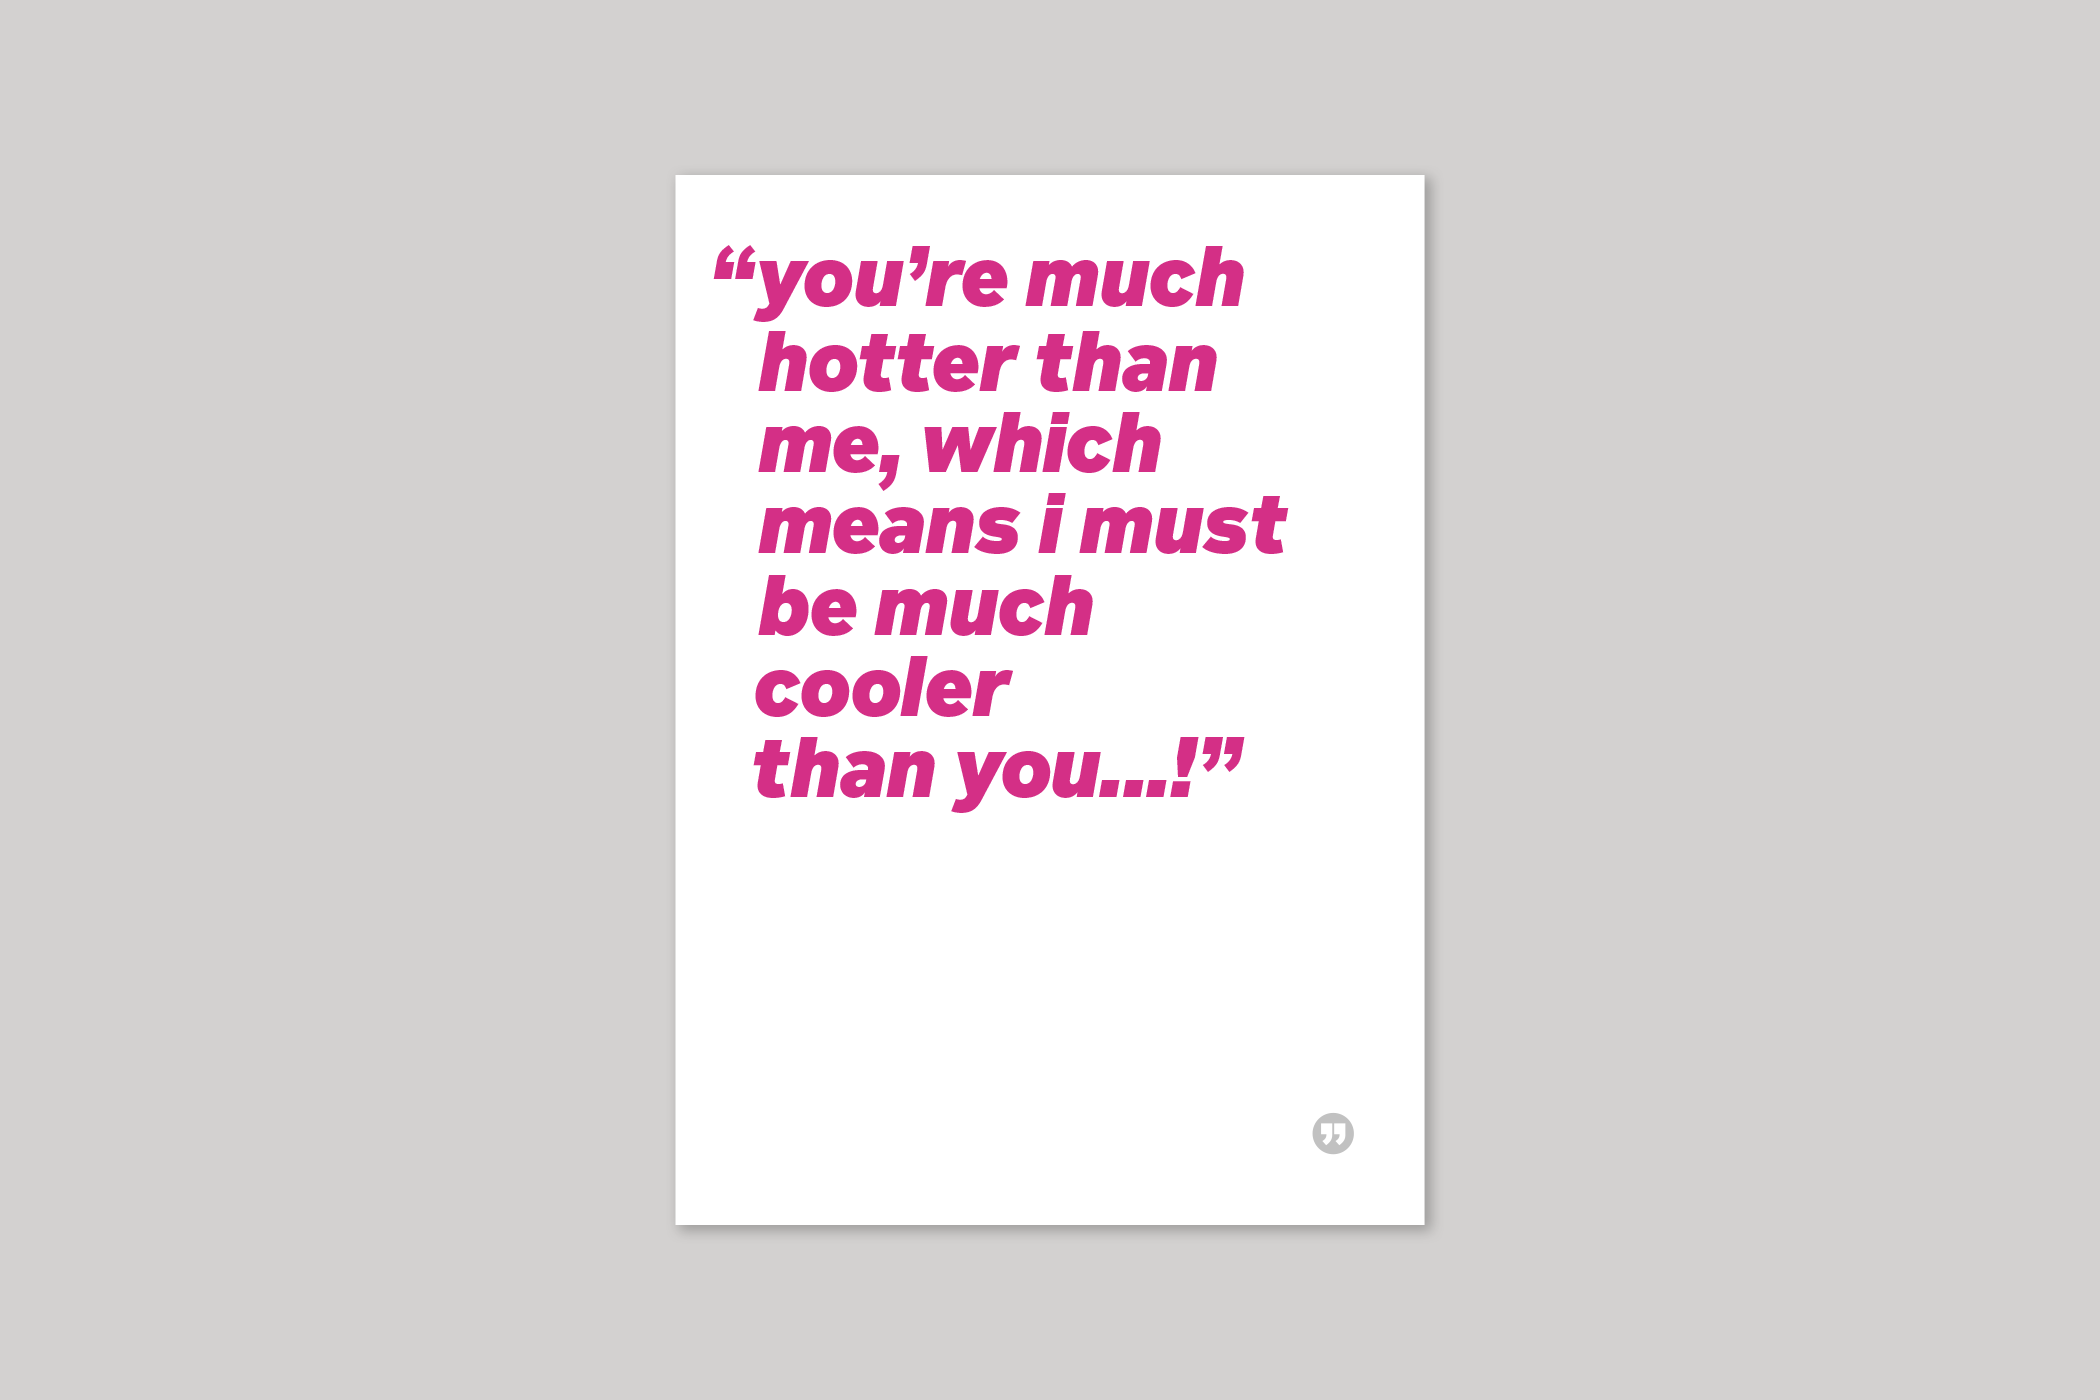 Hotter Than Me funny quotation from Quotecards range of cards by Icon.